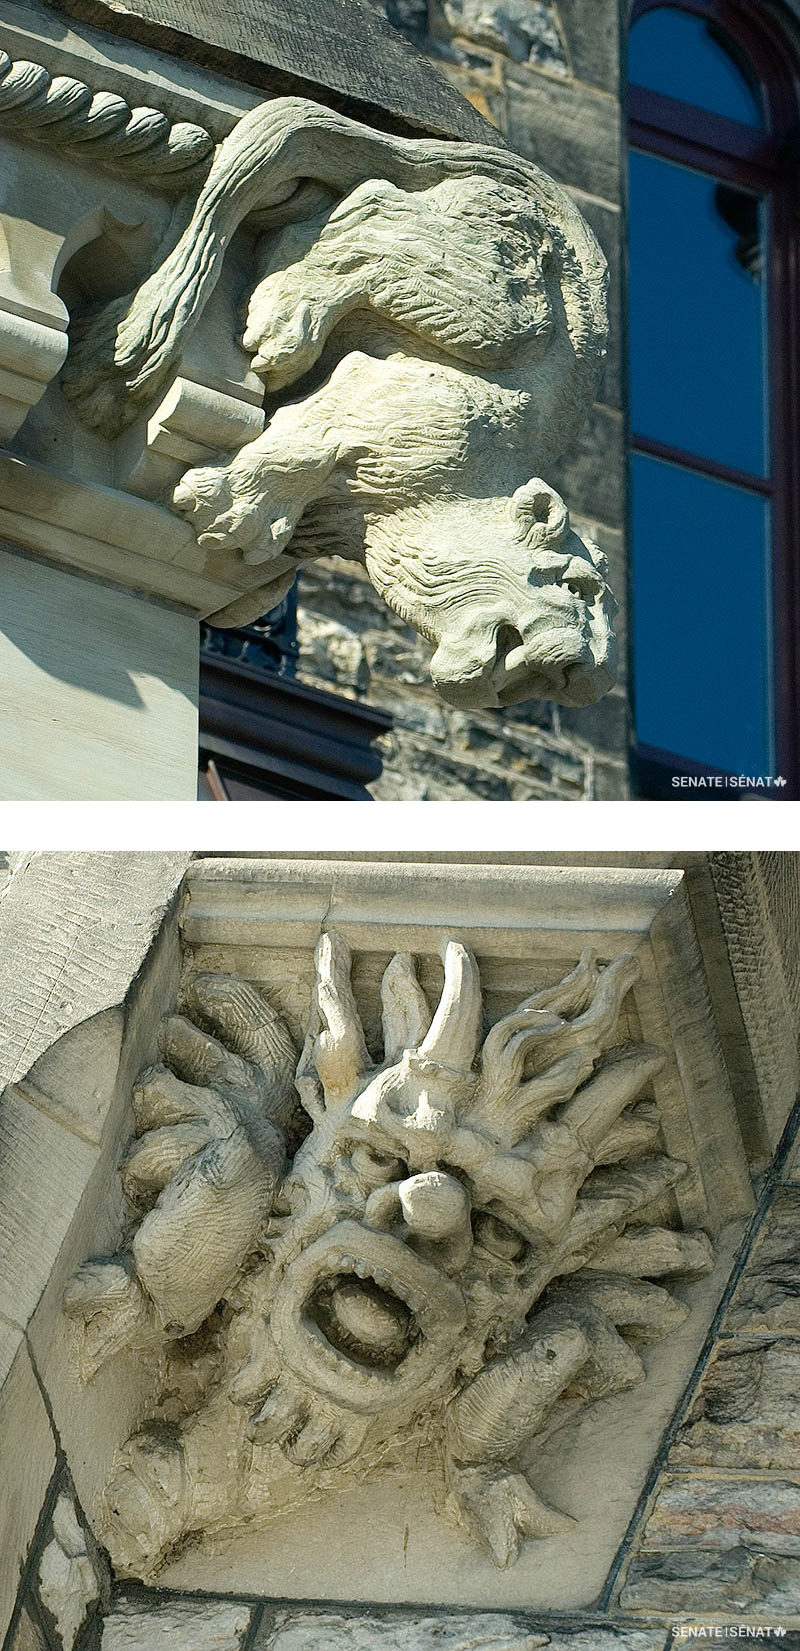 Snarling <a href='https://sencanada.ca/en/sencaplus/how-why/gargoyles-and-grotesques-parliament-hills-sinister-sentinels/' target='_blank'>grotesques</a>, inspired by carvings on medieval cathedrals, run riot on East Block’s exterior. Some are hybrids of different animals. Others combine human heads with the bodies of mythical creatures such as dragons and basilisks.